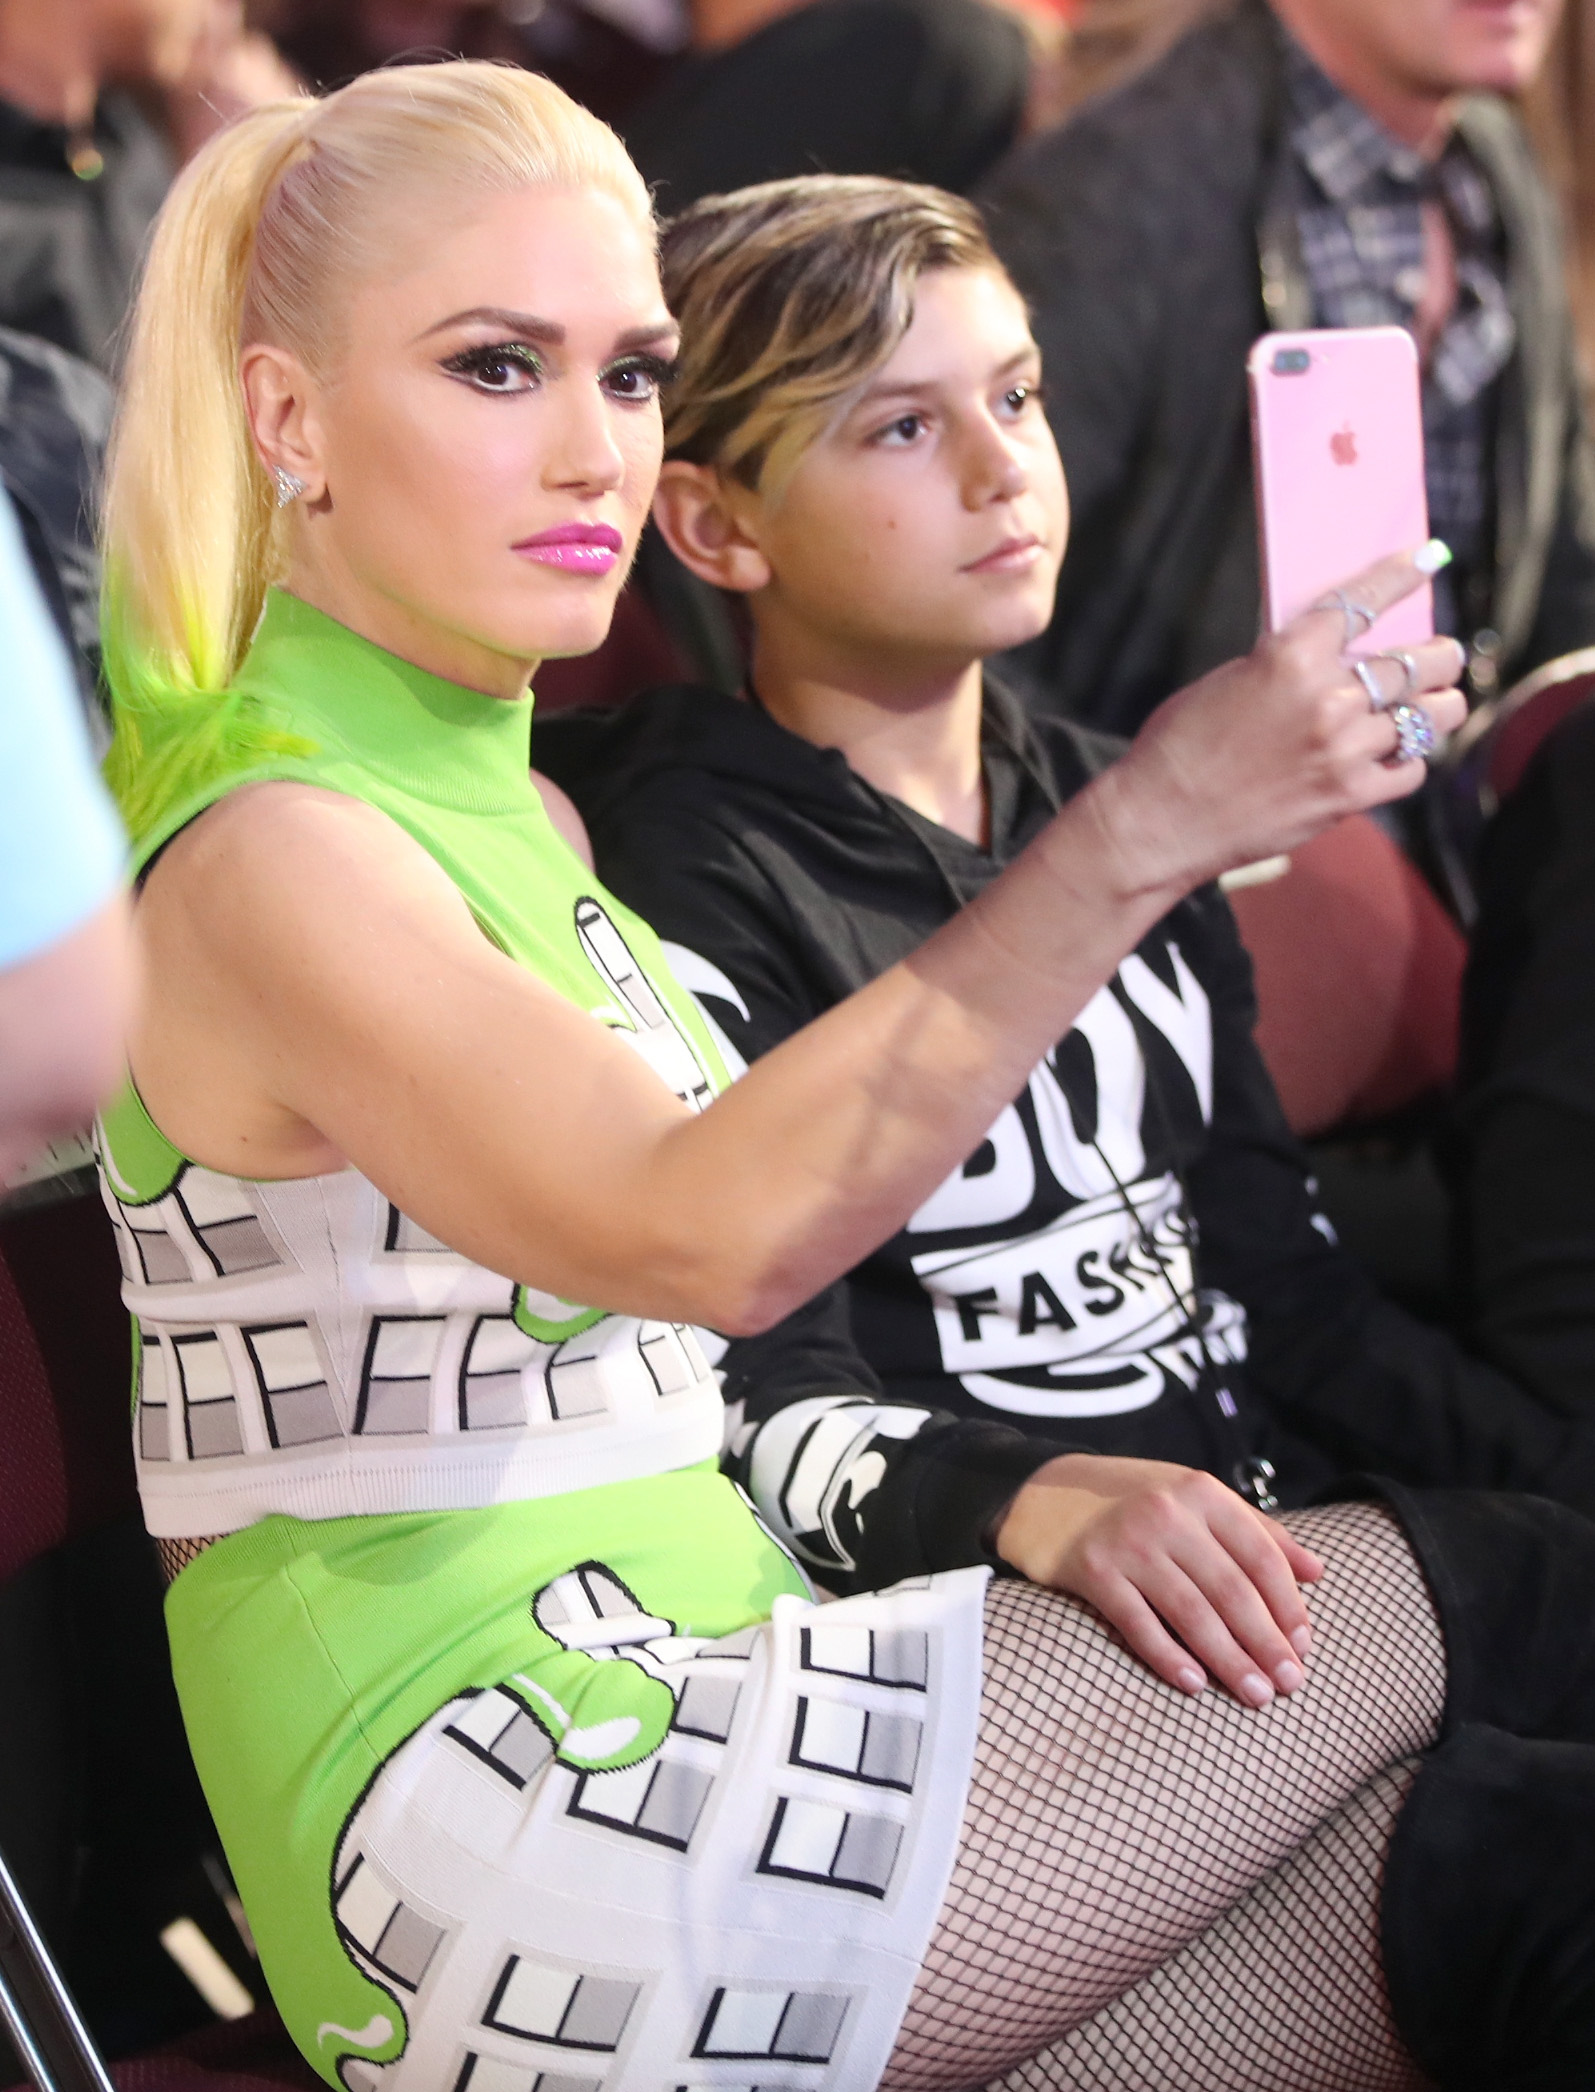 Gwen Stefani and Kingston Rossdale at the Nickelodeon's Kids' Choice Awards in Los Angeles, California on March 11, 2017 | Source: Getty Images